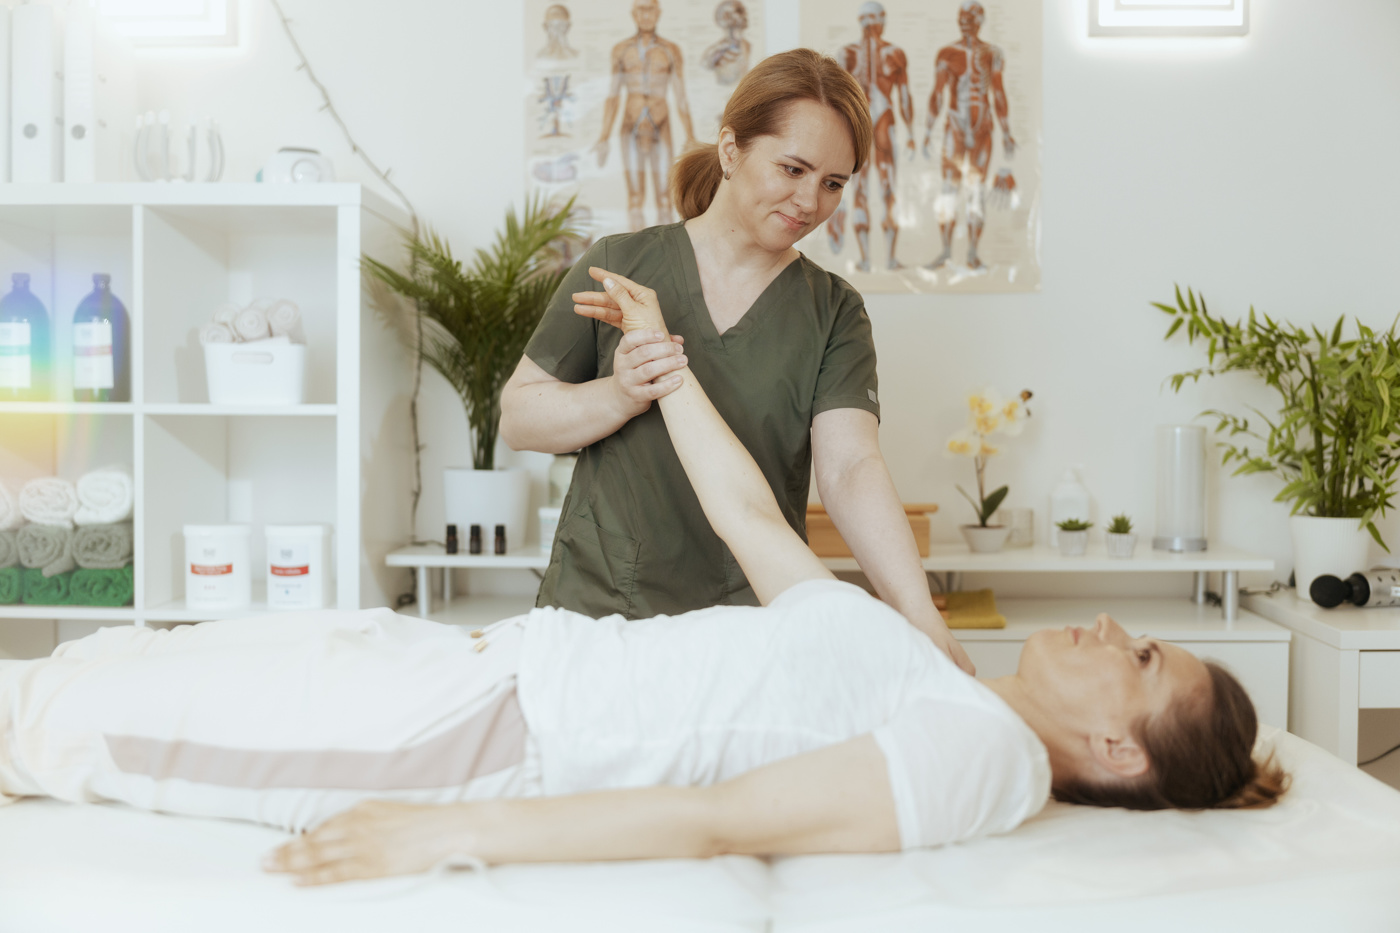 A complementary therapist uses movement work to stimulate the patient's self-regulatory powers.